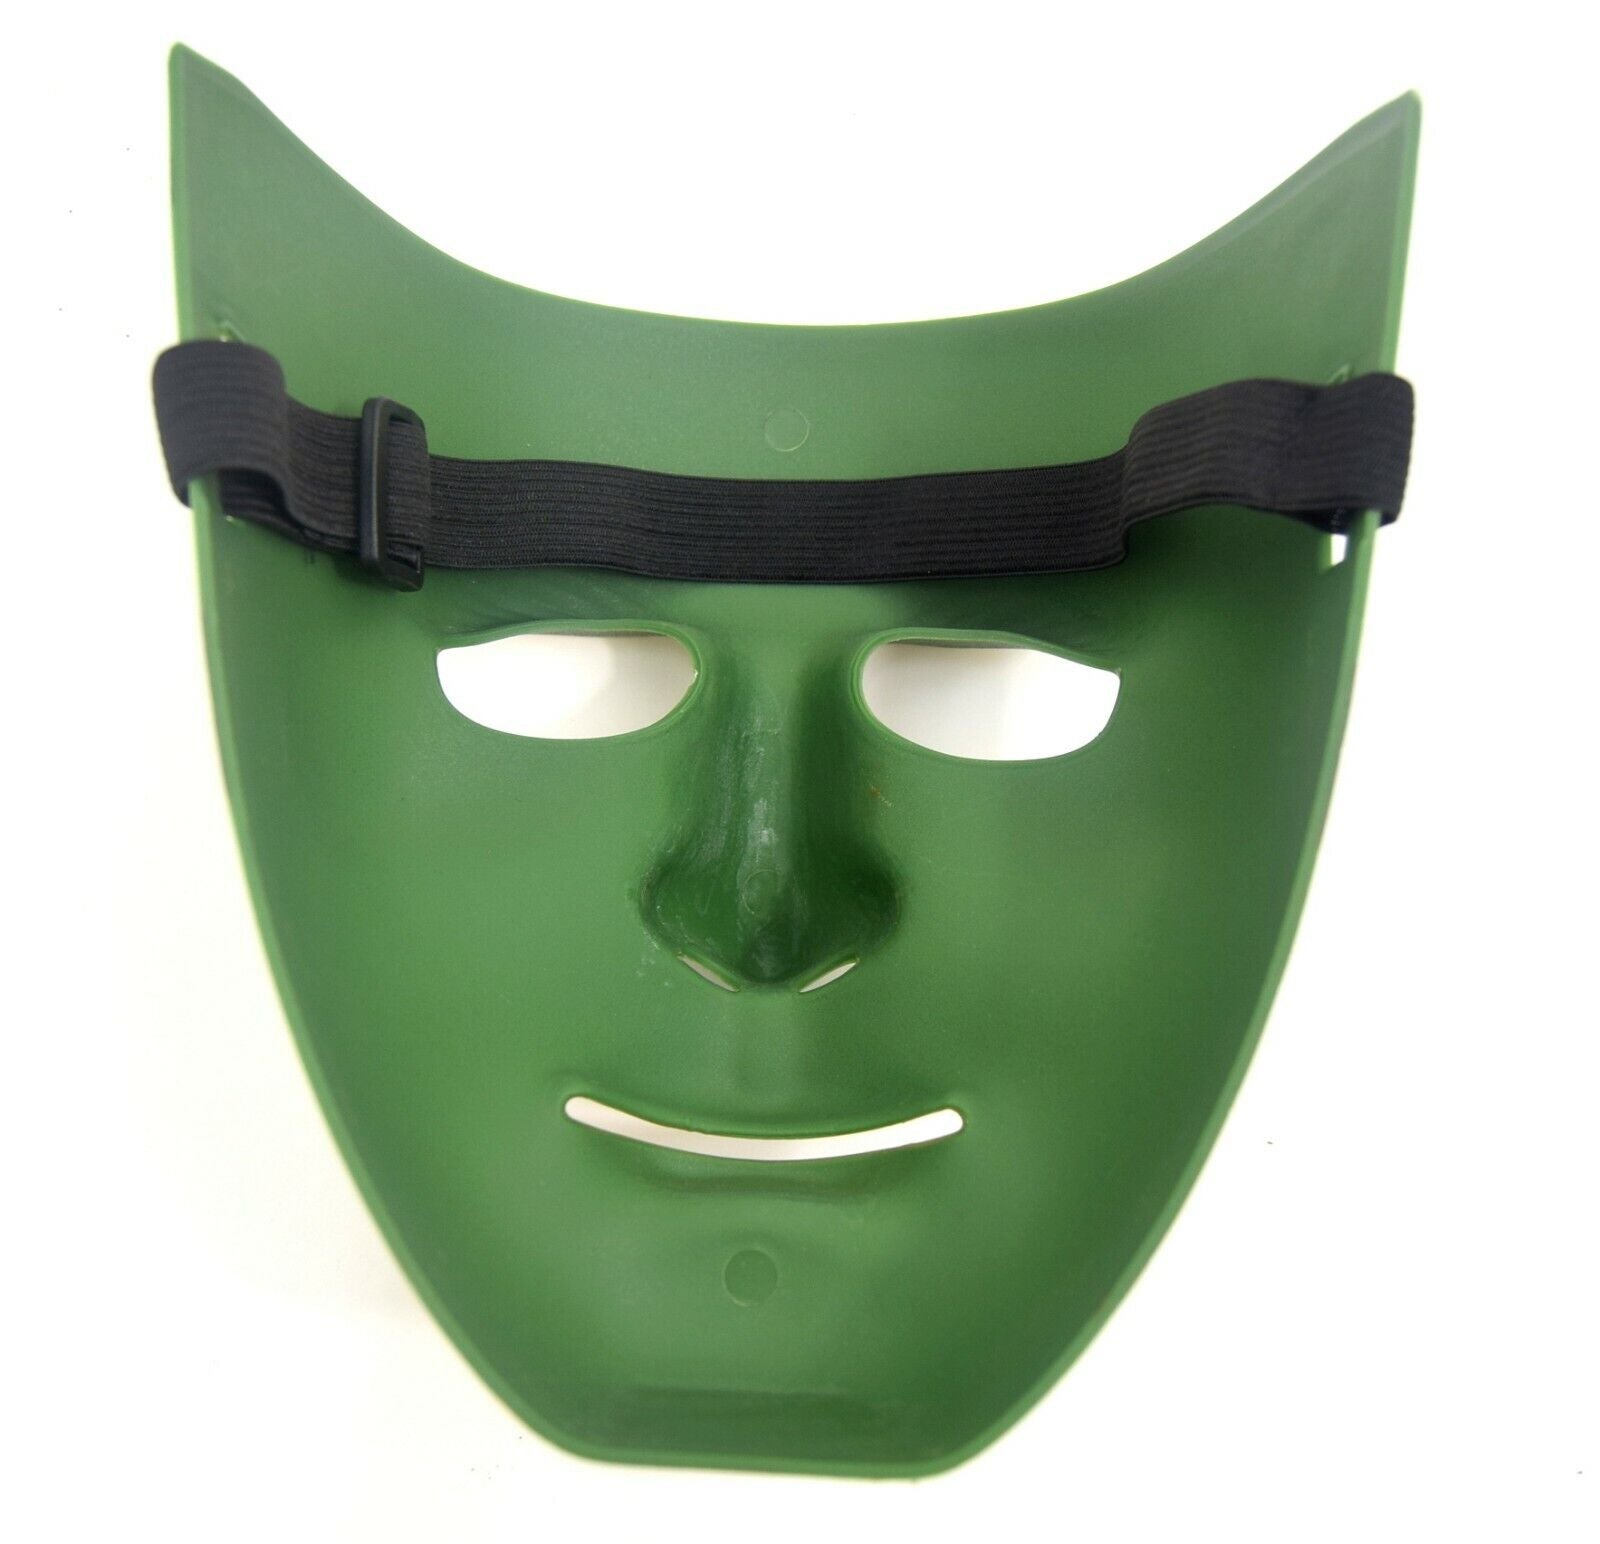 Olive Protective Full Face Mask Hockey Airsoft Plastic ABS Shield Special Forces